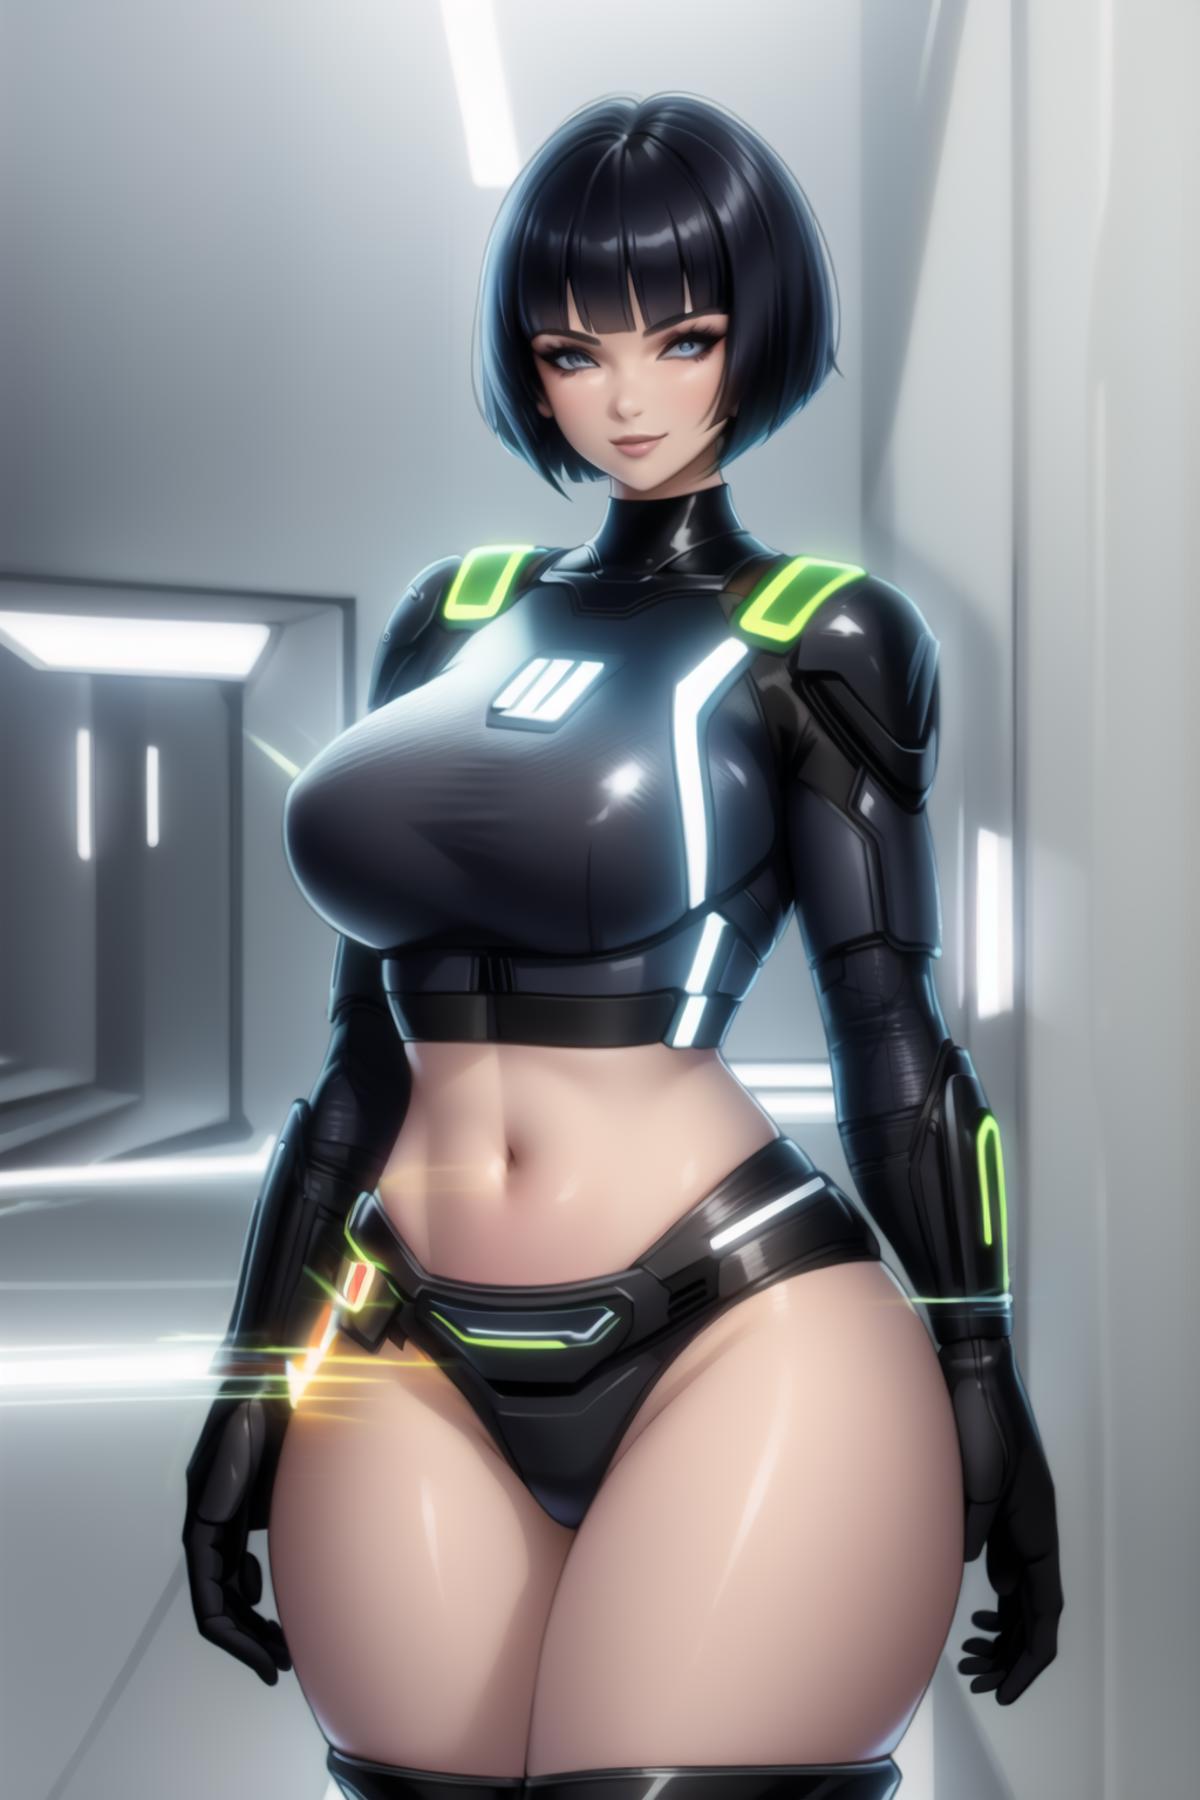 AI model image by rulles